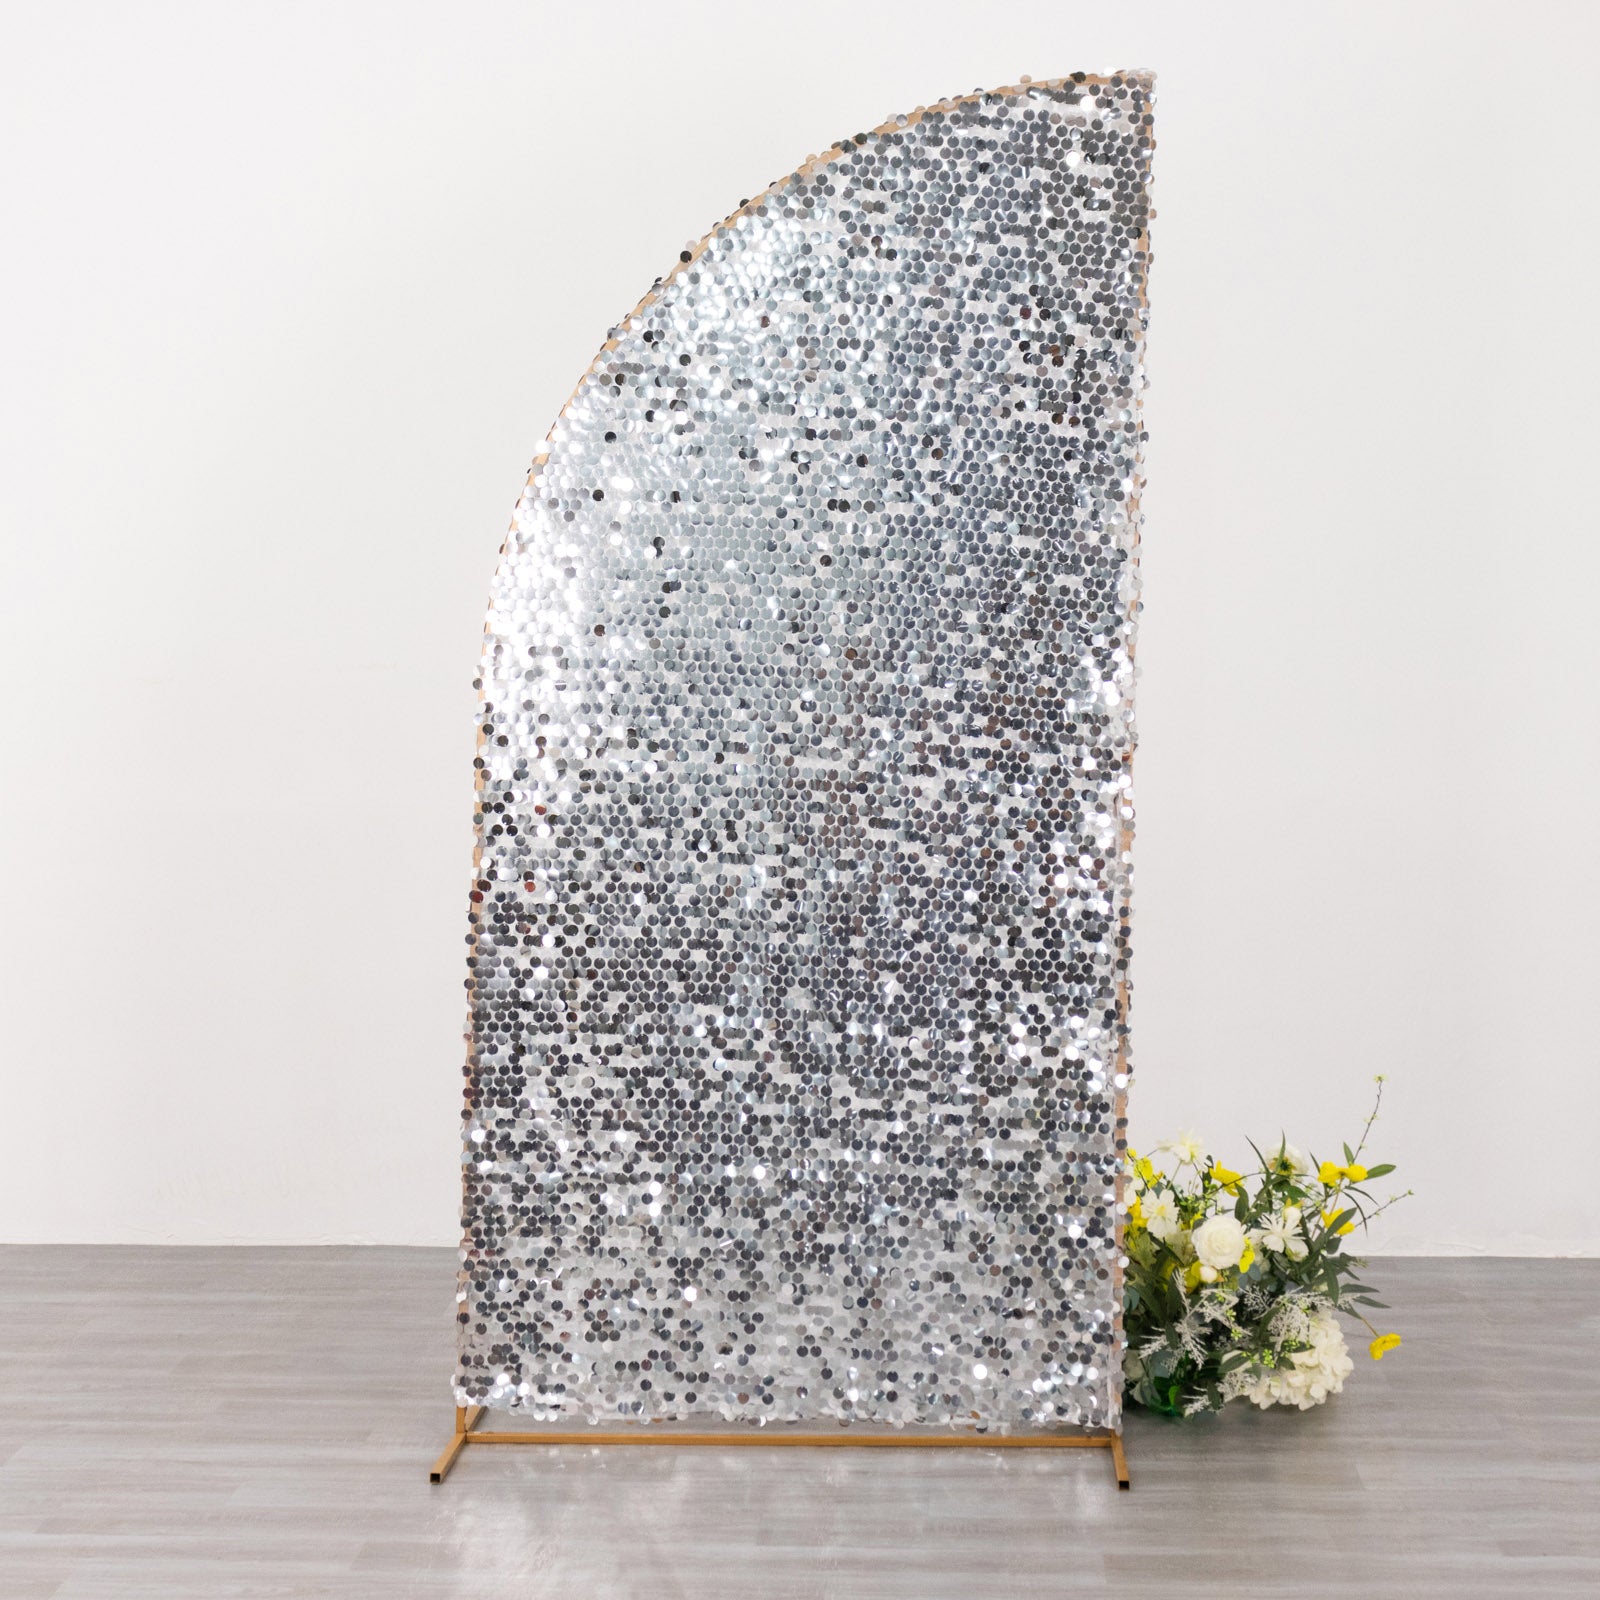 Shiny Silver Large Sequins Backdrop